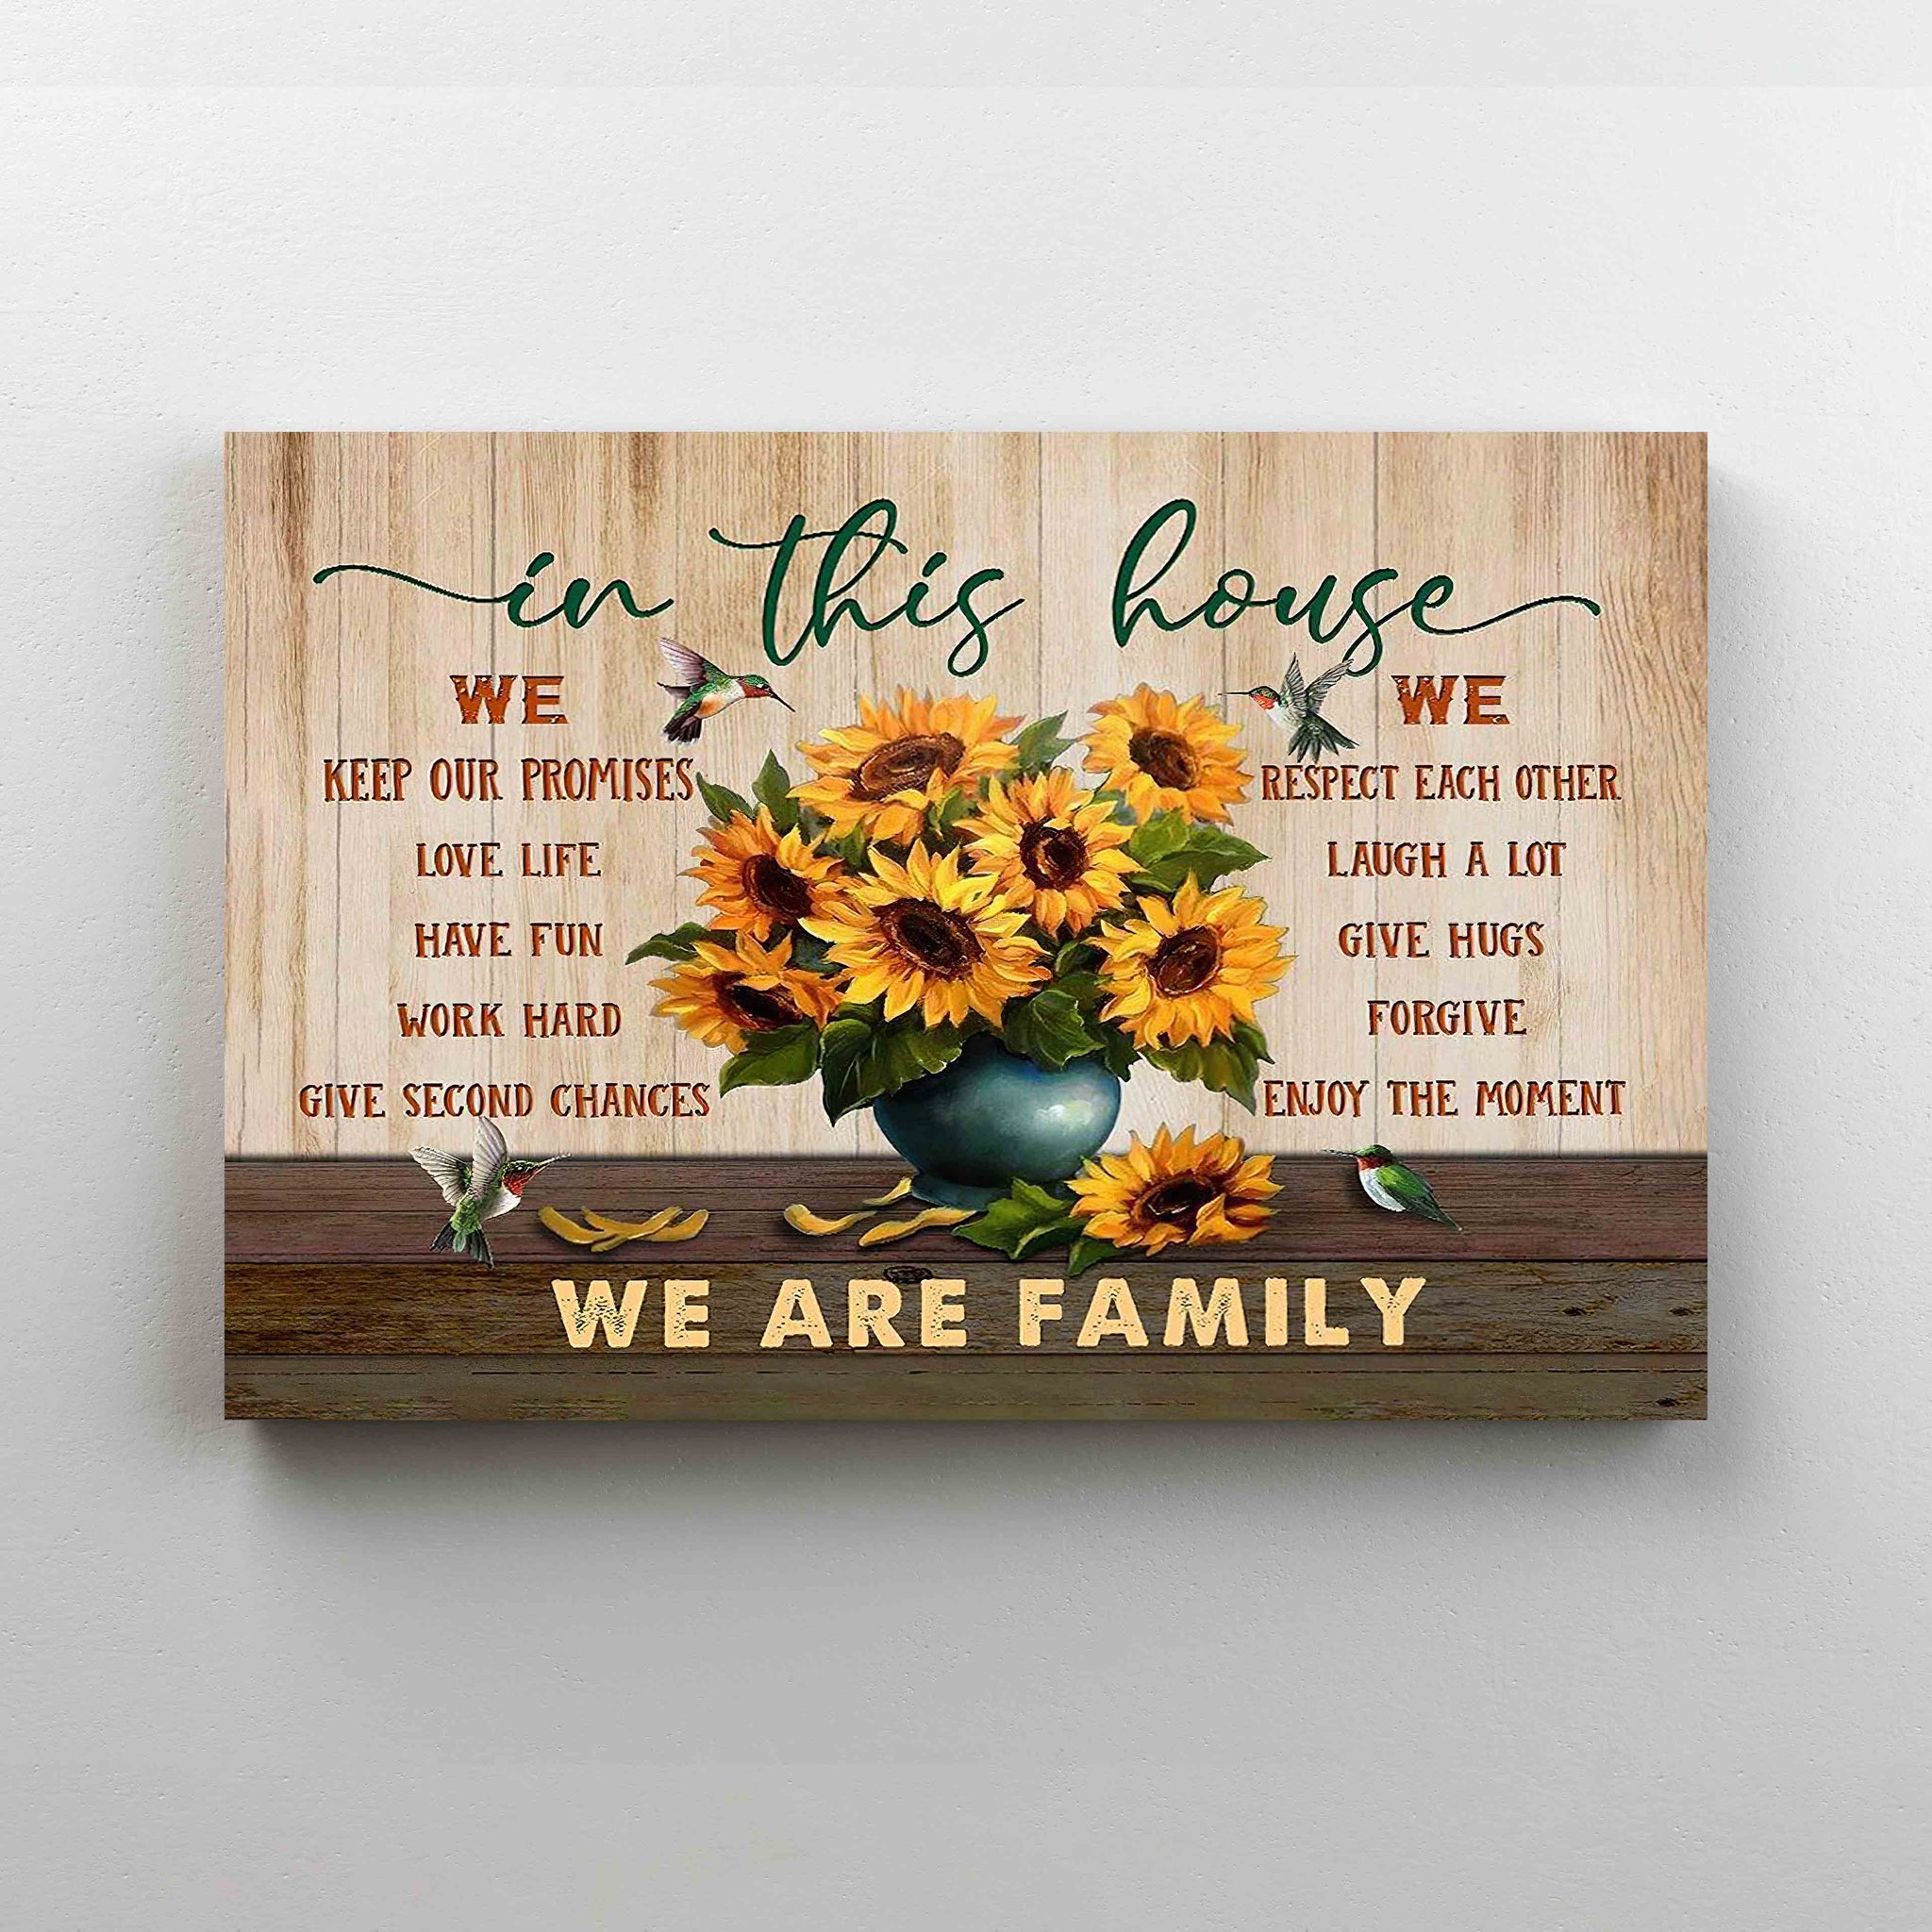 In This House Canvas, We Keep Our Promises Canvas, Sunflower Canvas, We Are Family Canvas